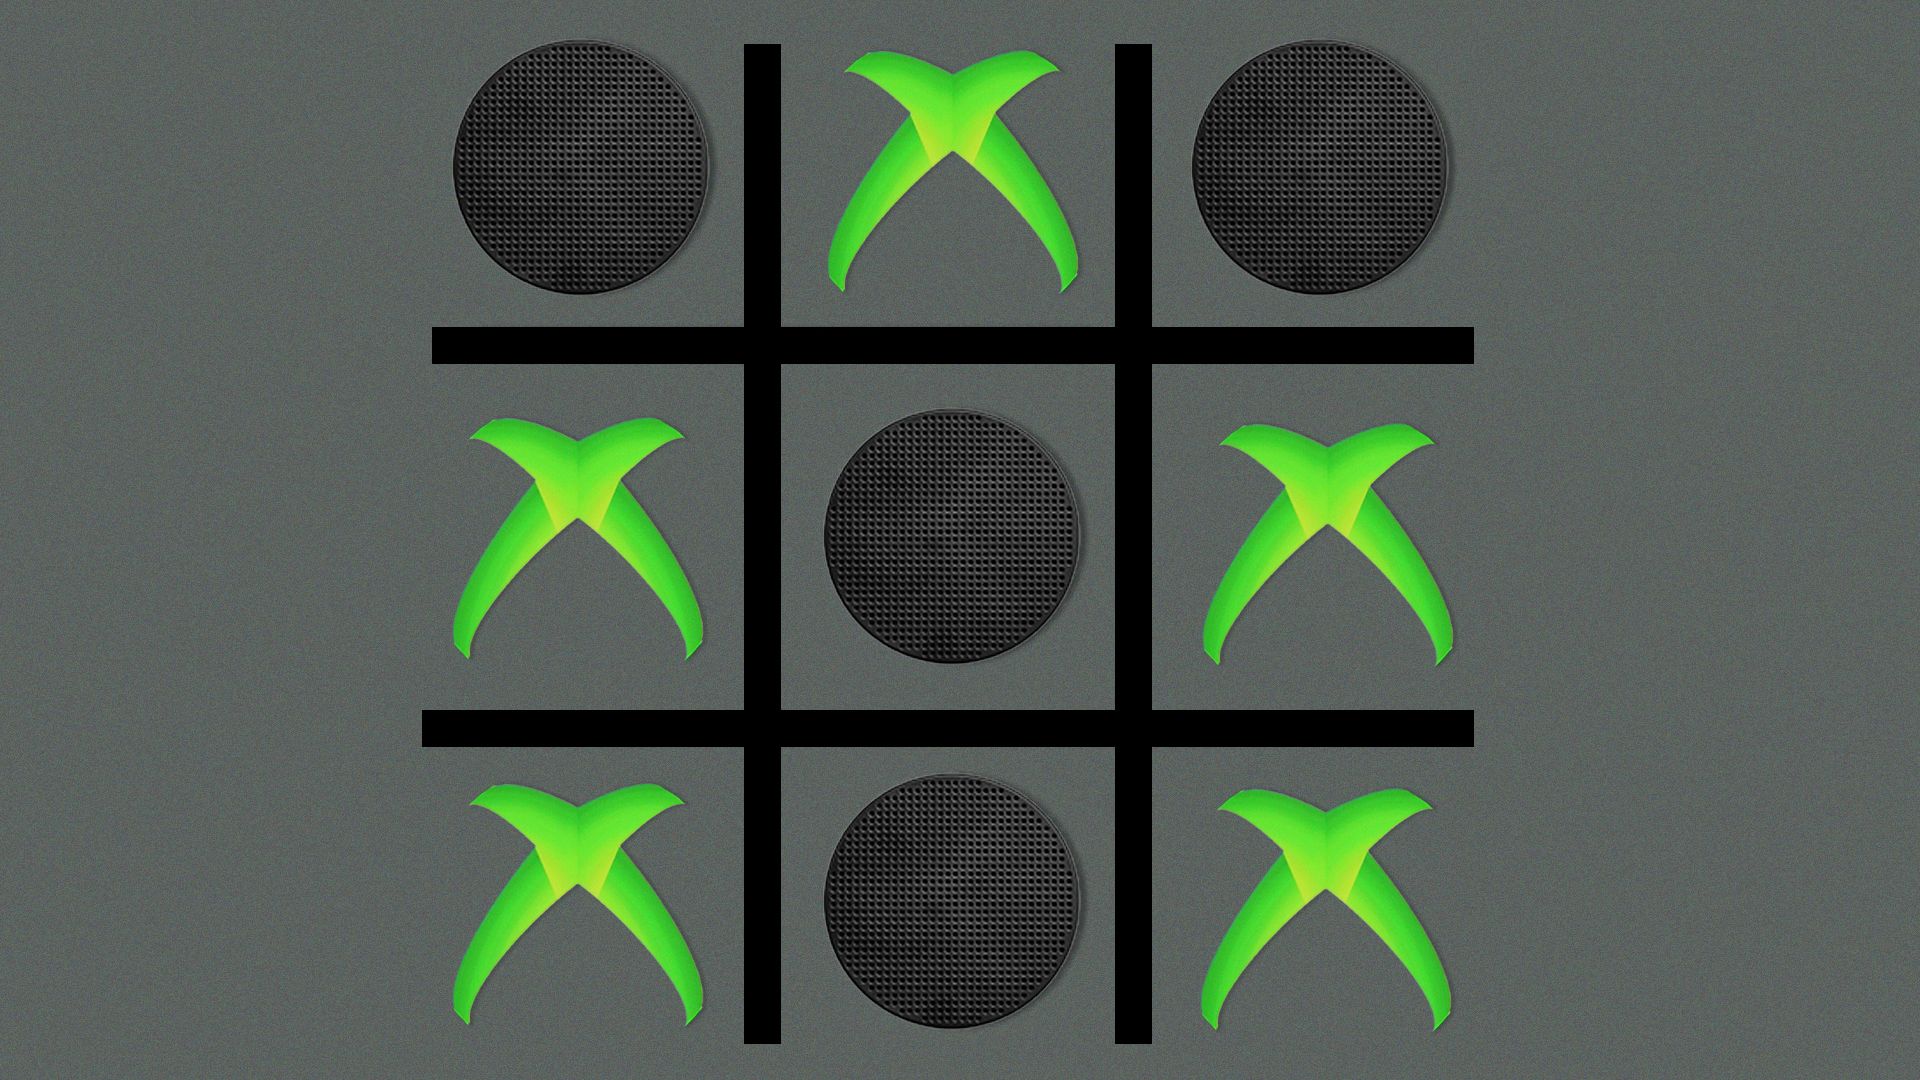 Xbox logos in a tic-tac-toe board where no player has won